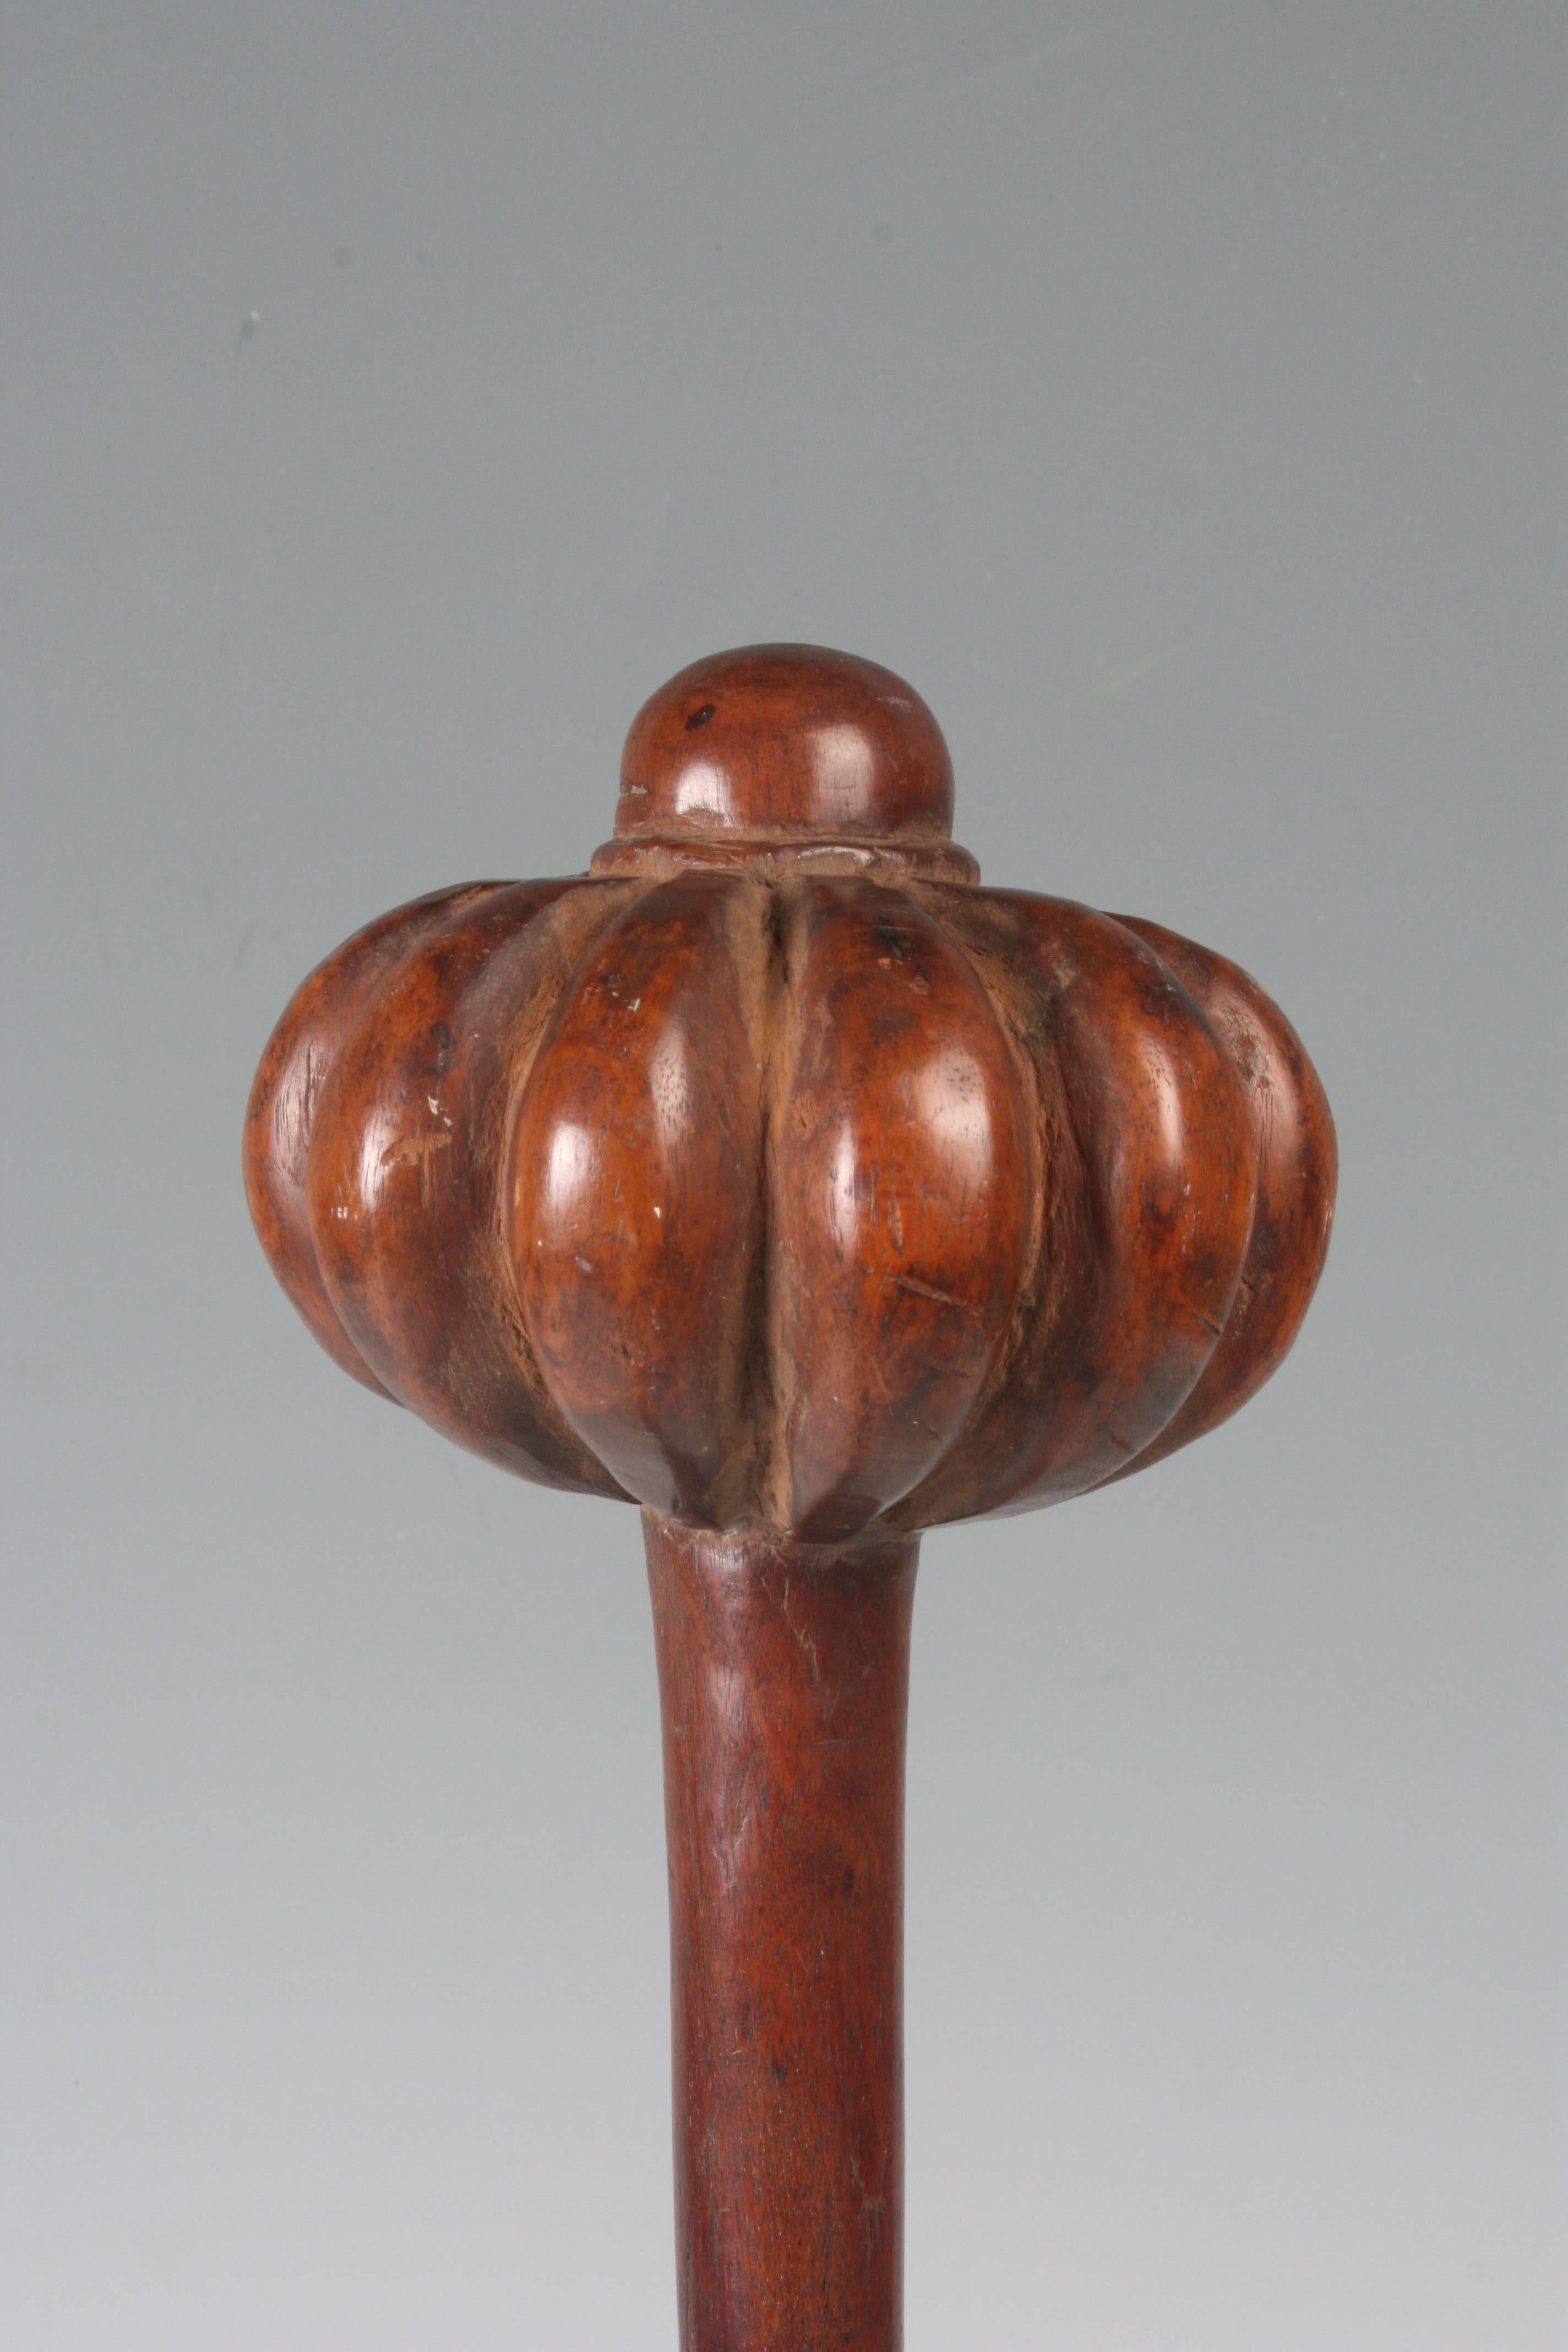 Presented by Tribalmania Gallery

Fine elegant early 19th century Polynesian Tongan Ula throwing club

Origin: W. Polynesia, Tonga (Provenance: Old New England collection)

Period/Date: At least first quarter of the 19th century

Materials: